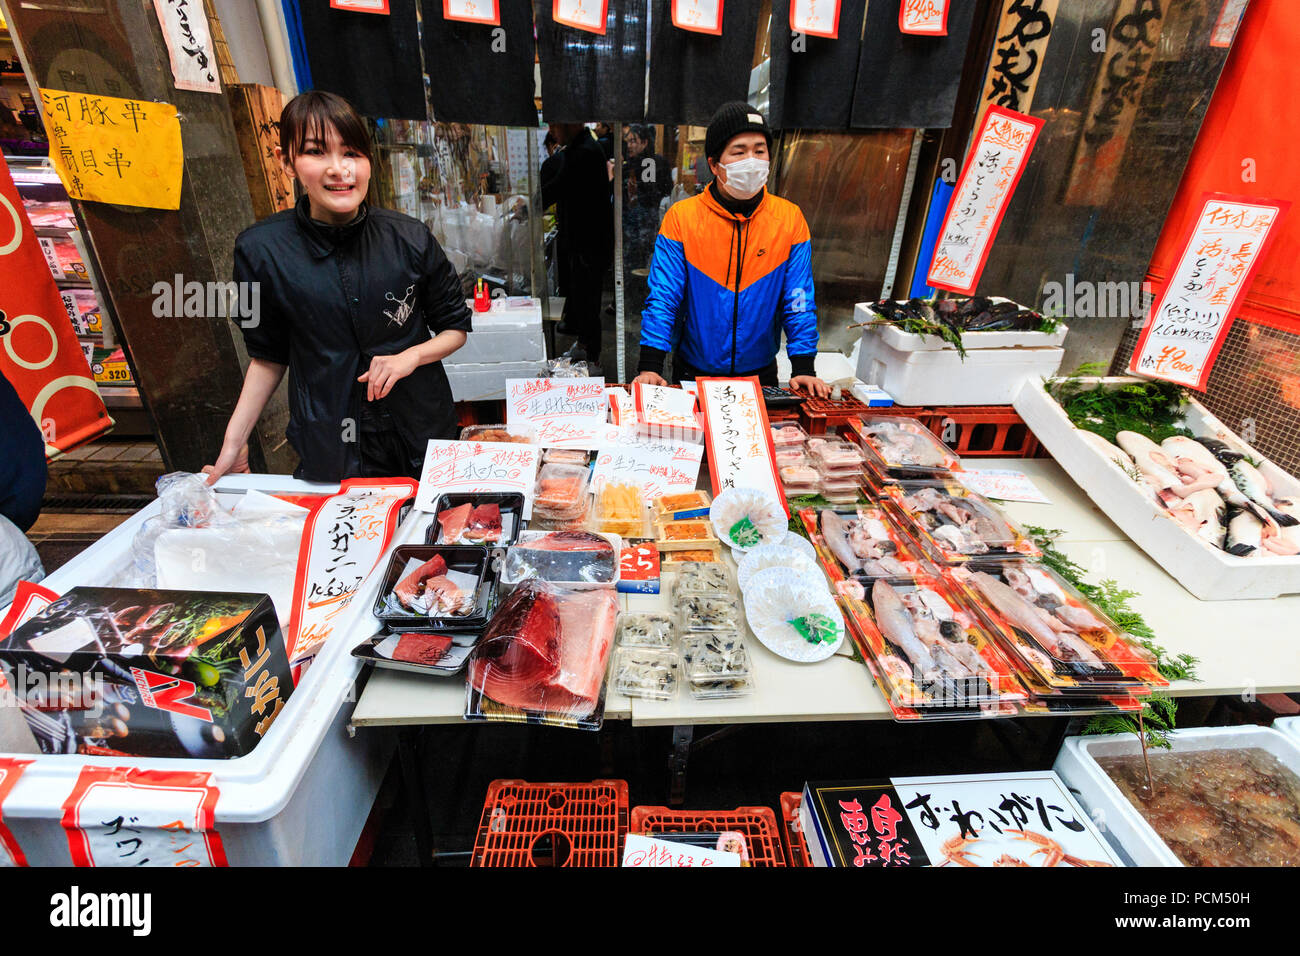 Kuromon Ichiba, food market in Osaka. Fish monger stall with fish and seafoods prepacked in plastic containers, two shop workers standing facing. Stock Photo